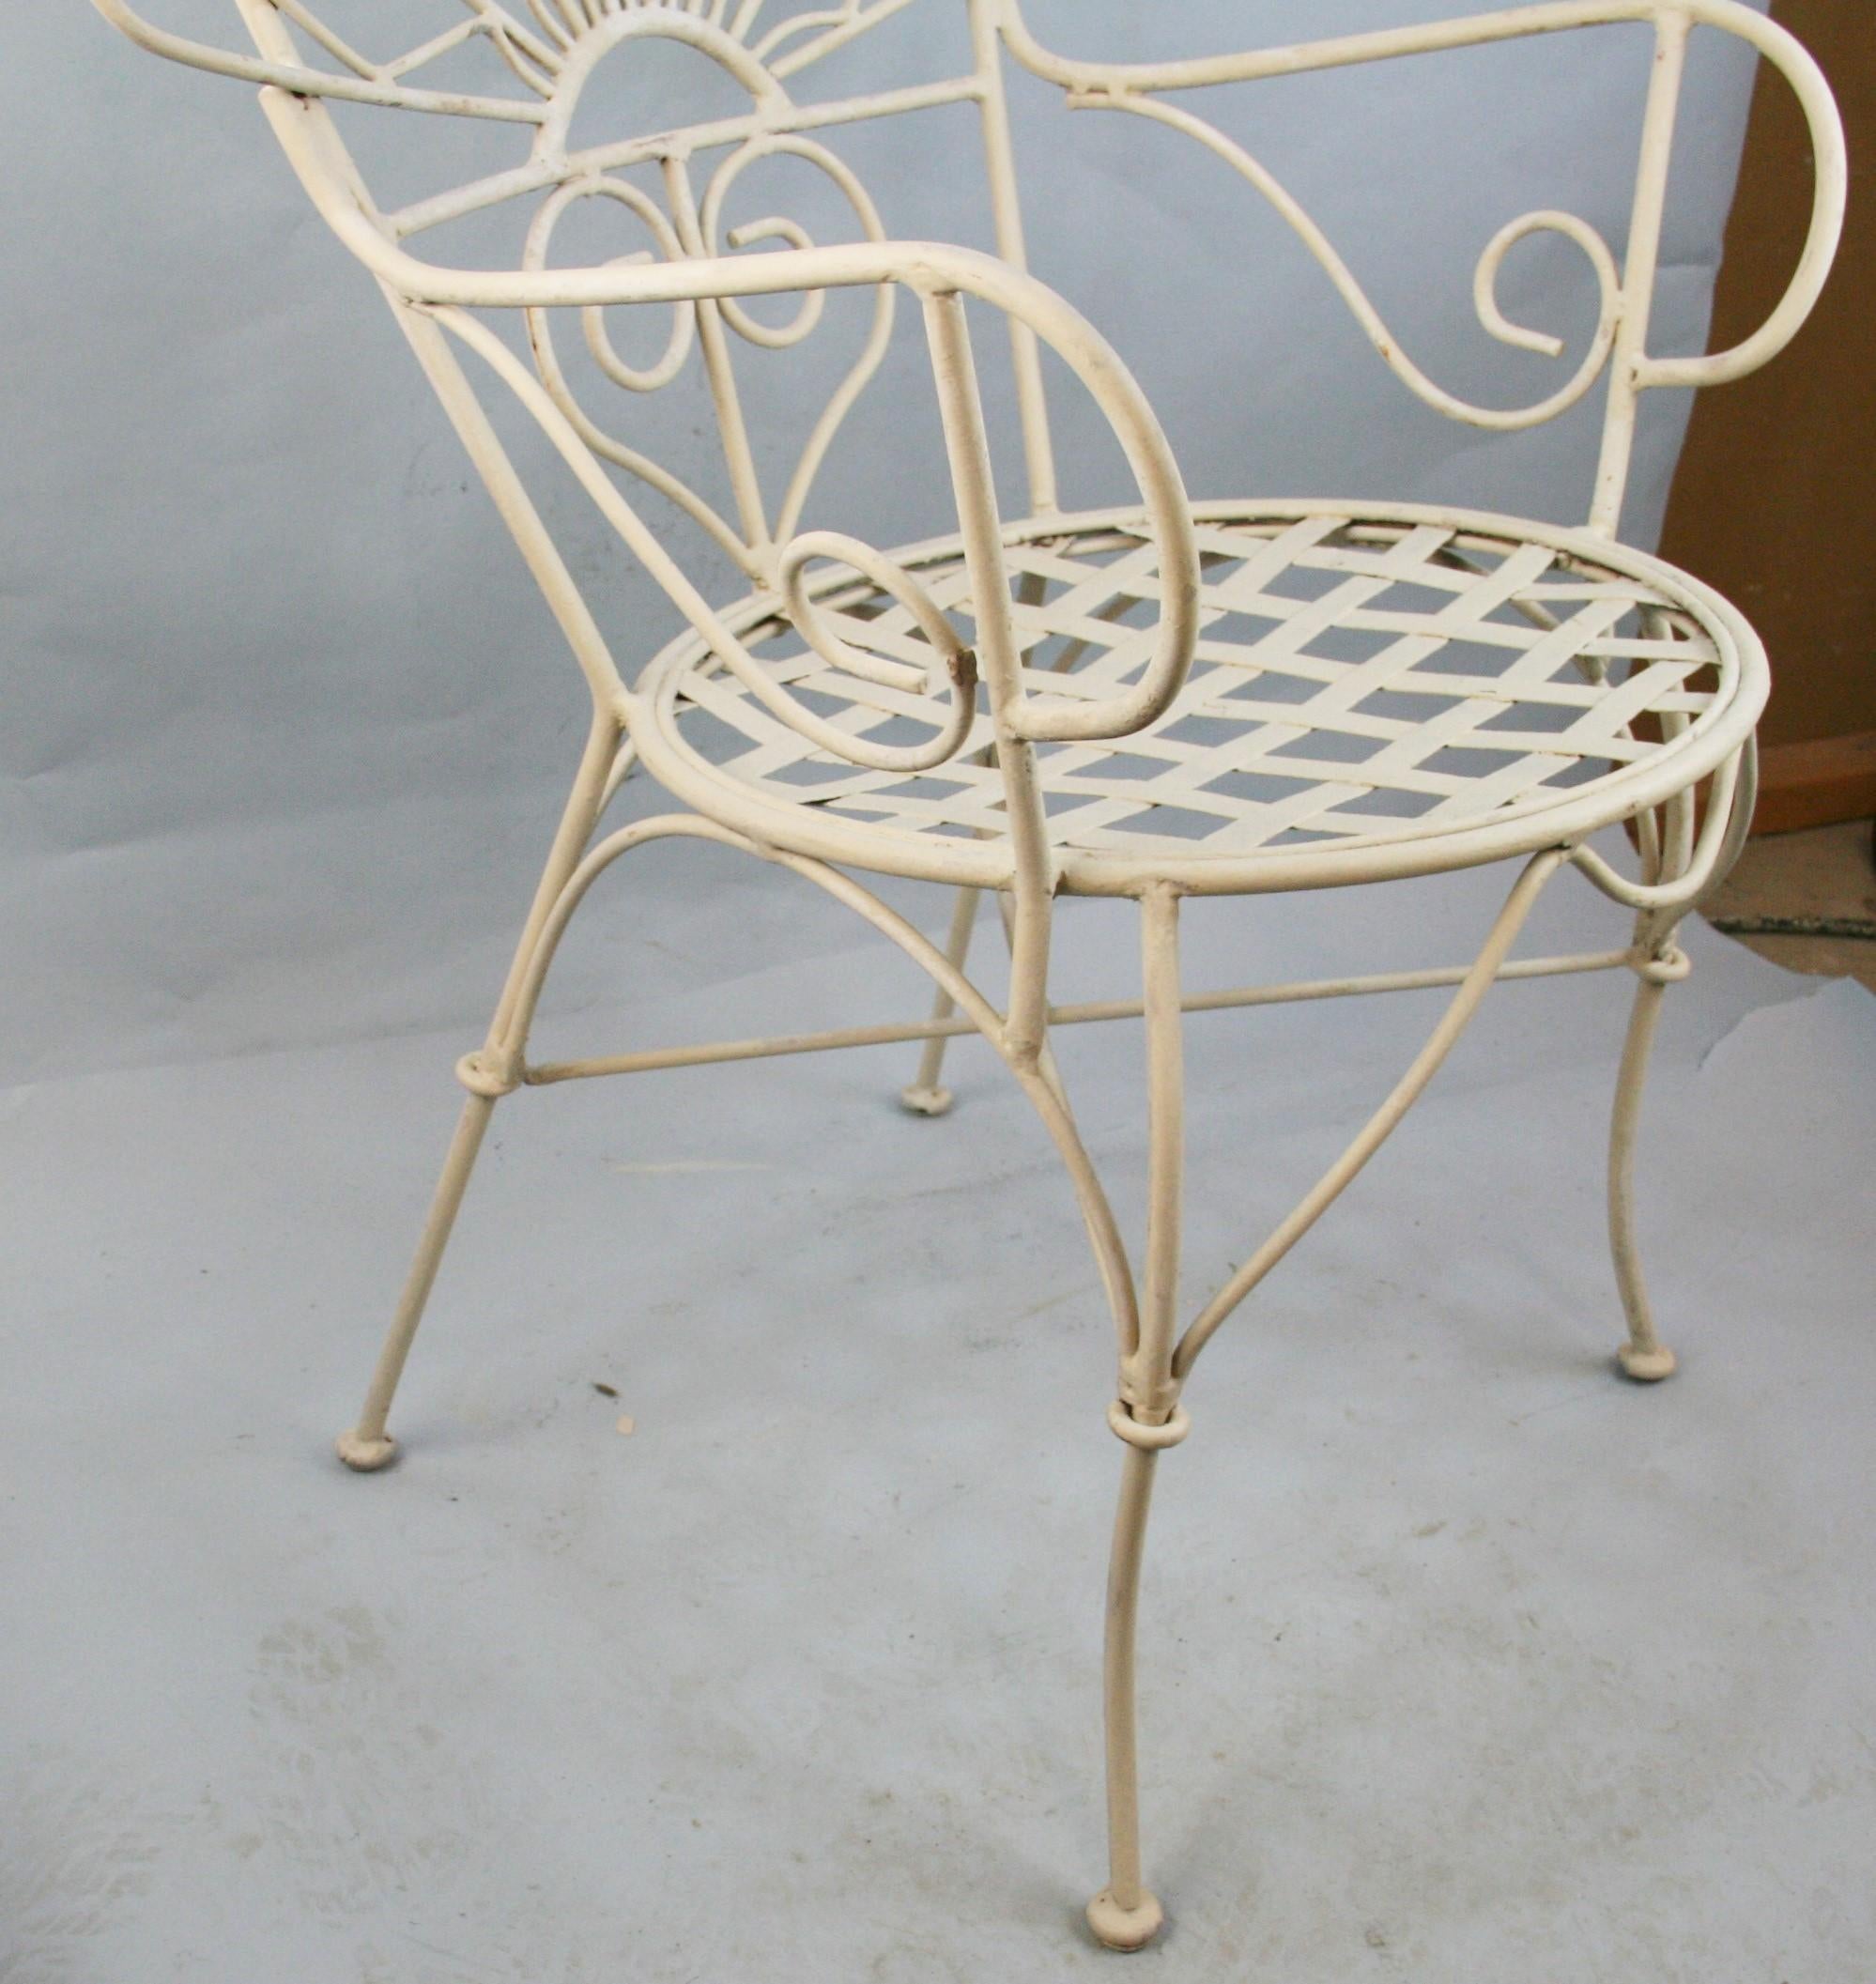 Pair Peacock Metal Garden Chairs In Good Condition For Sale In Douglas Manor, NY